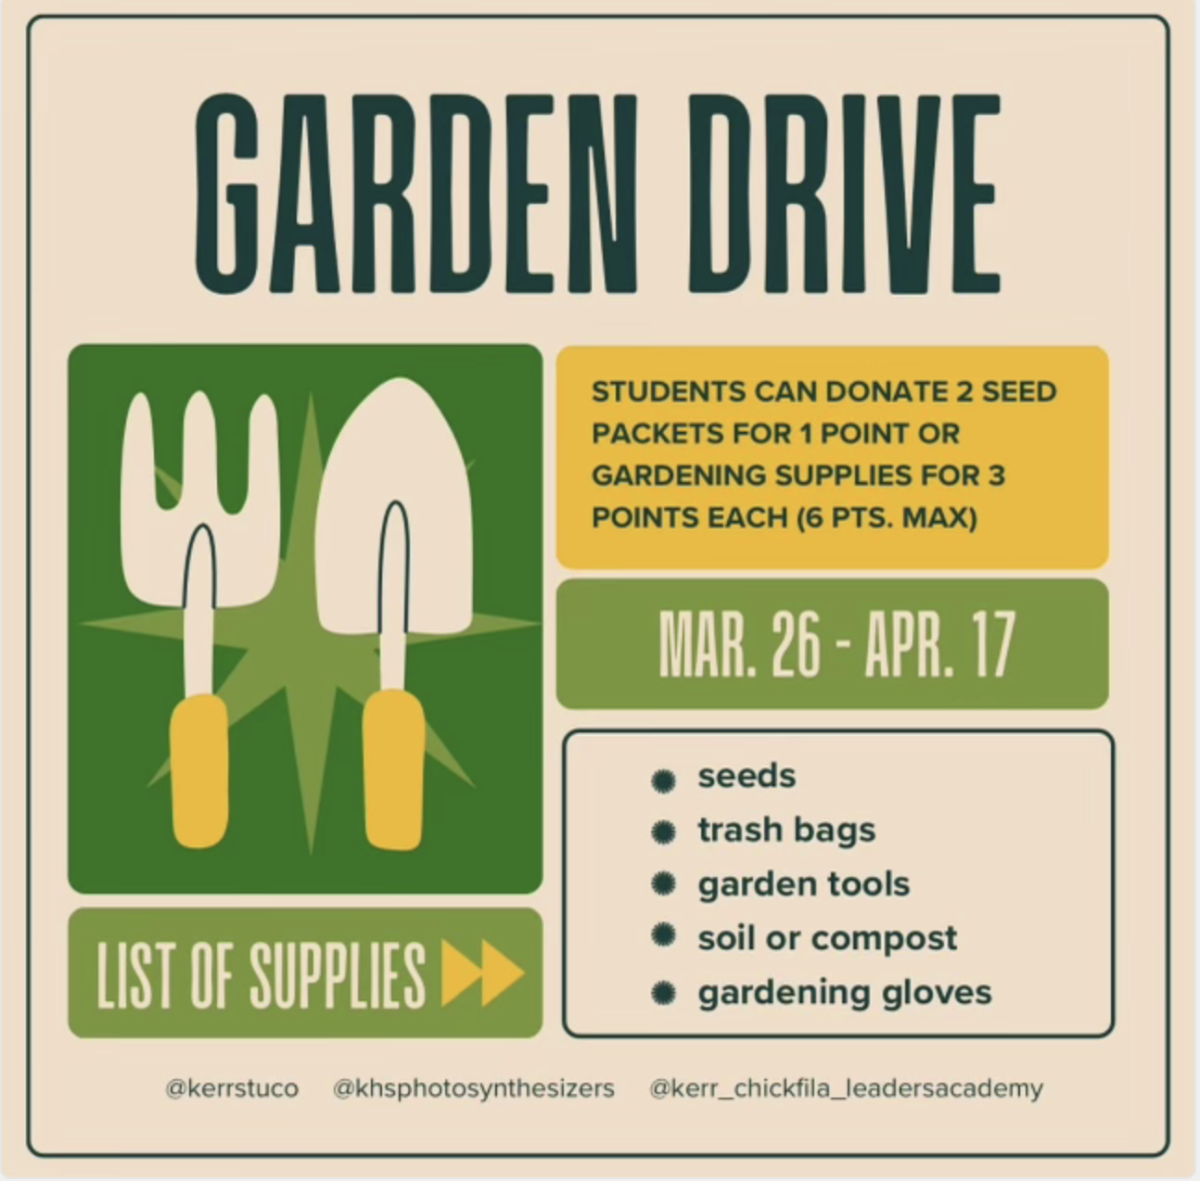 Student Council Collaboration: Garden Drive. Working with Photosynthesizers and Chickfila Leaders Academy, all participants can work towards making the scenery at school more appealing to the eye by donating garden supplies. Members can gain 1 point for gardening supplies for 3 points each.